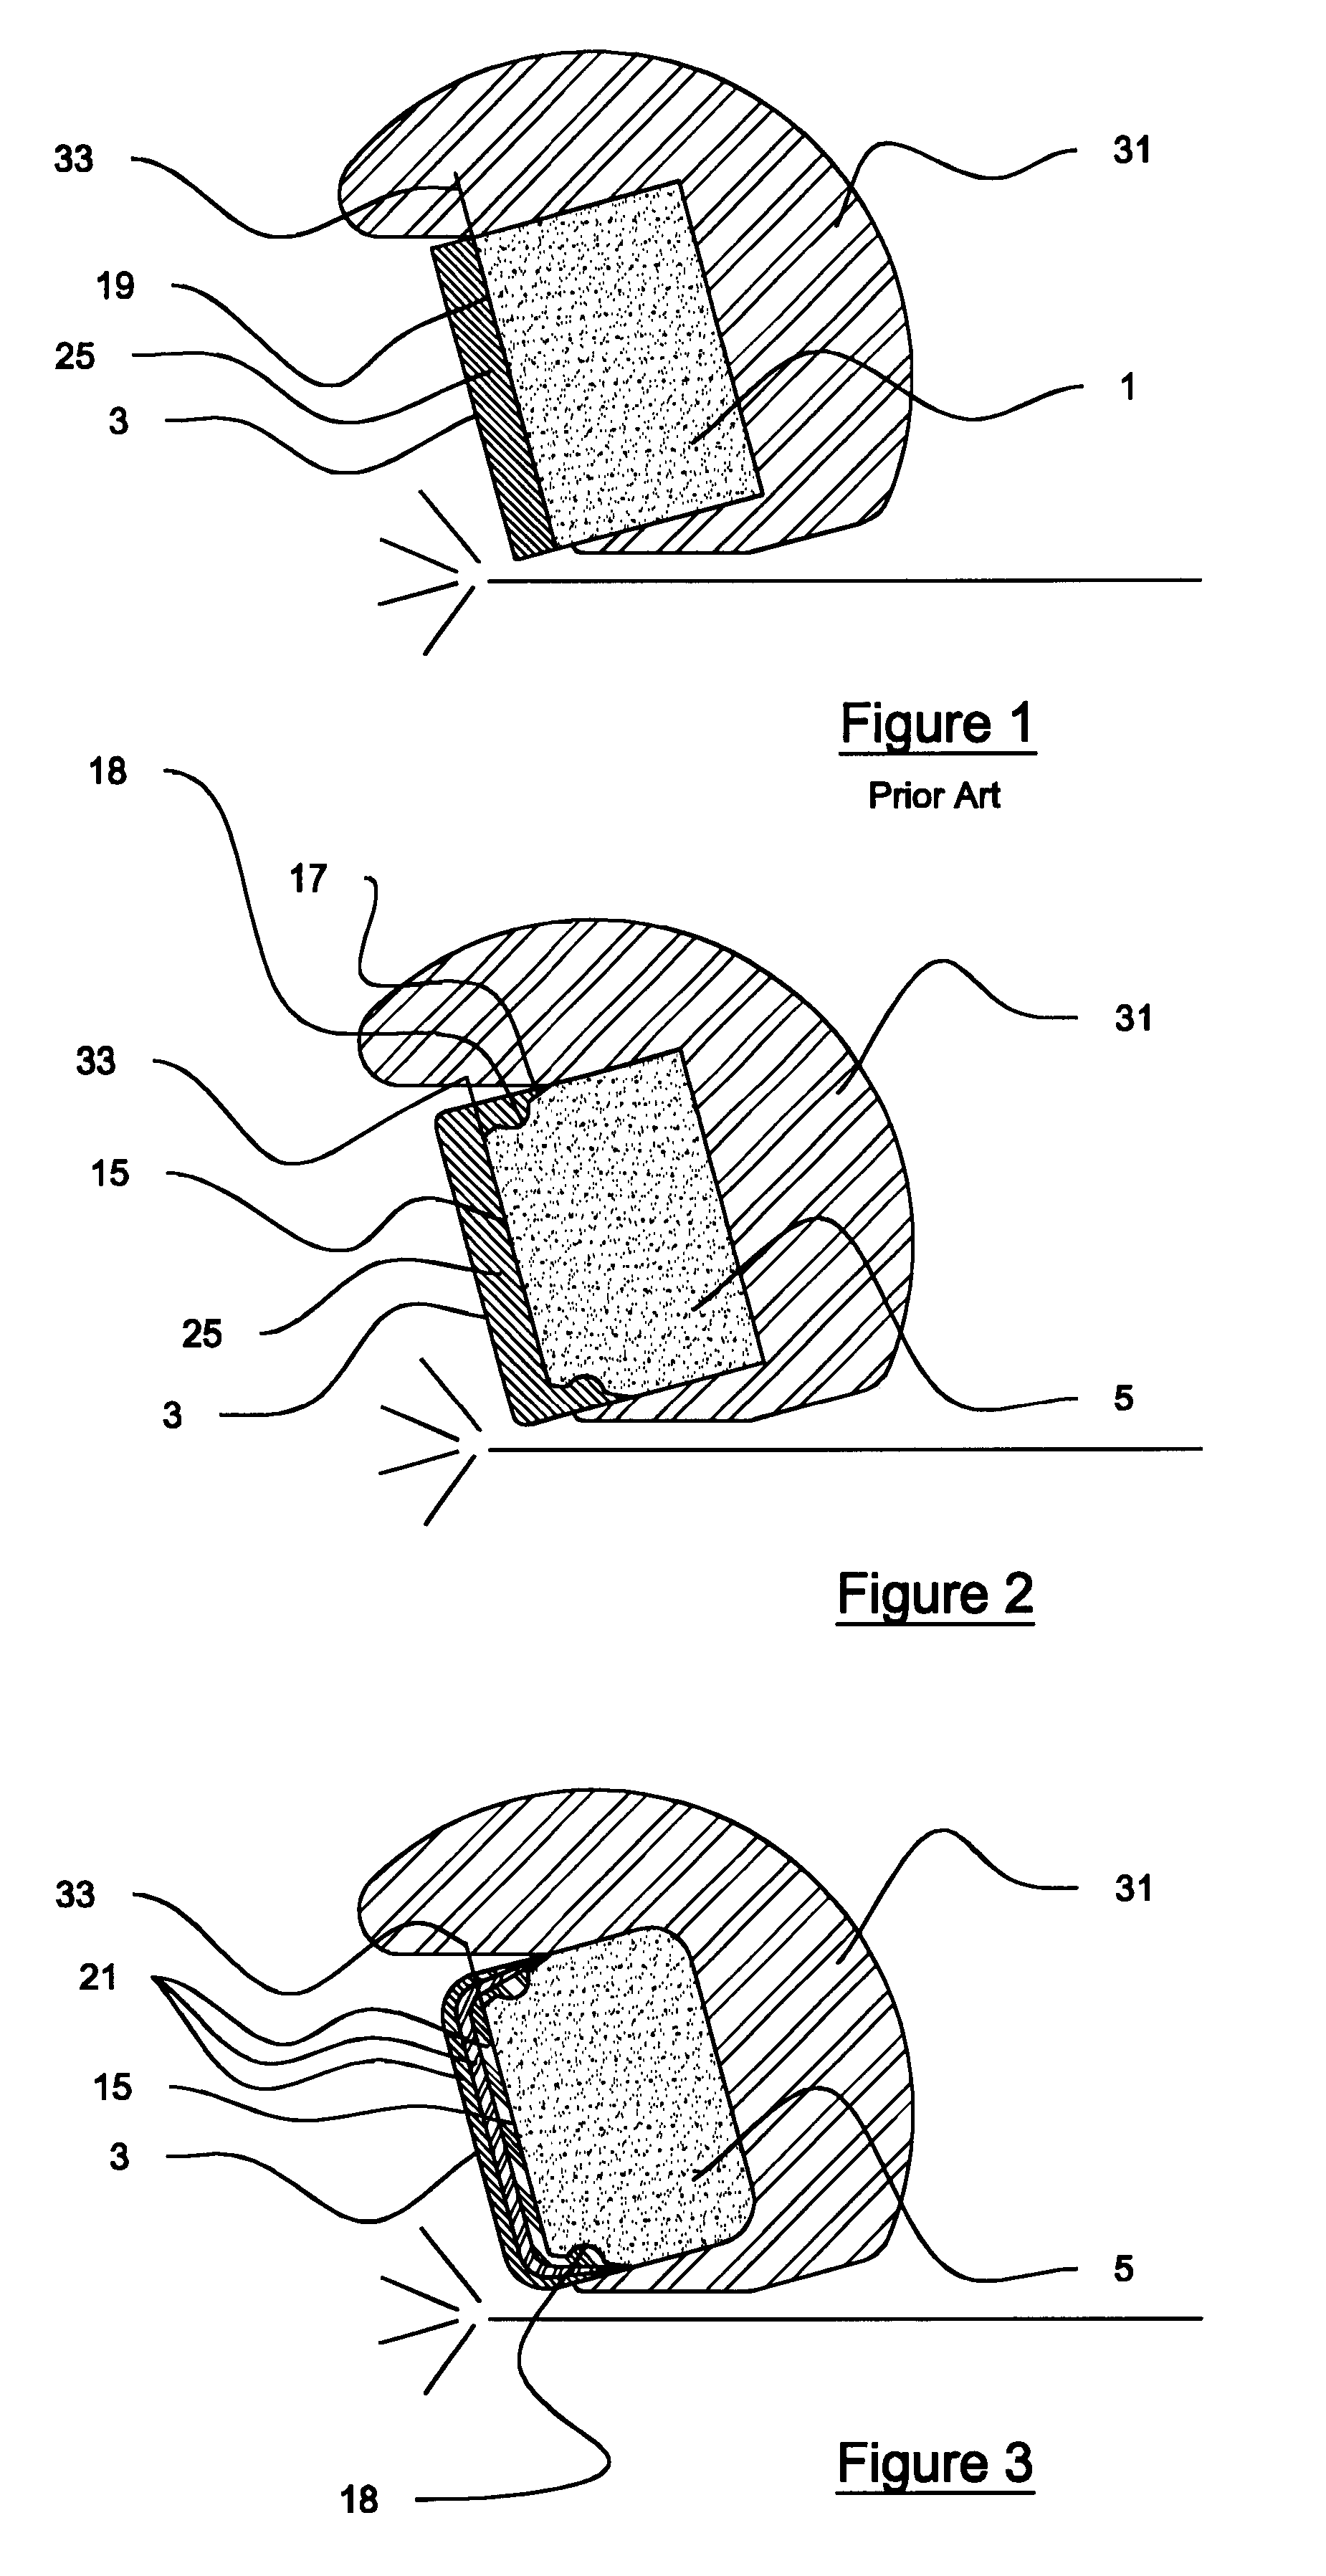 Superhard drill bit heel, gage, and cutting elements with reinforced periphery